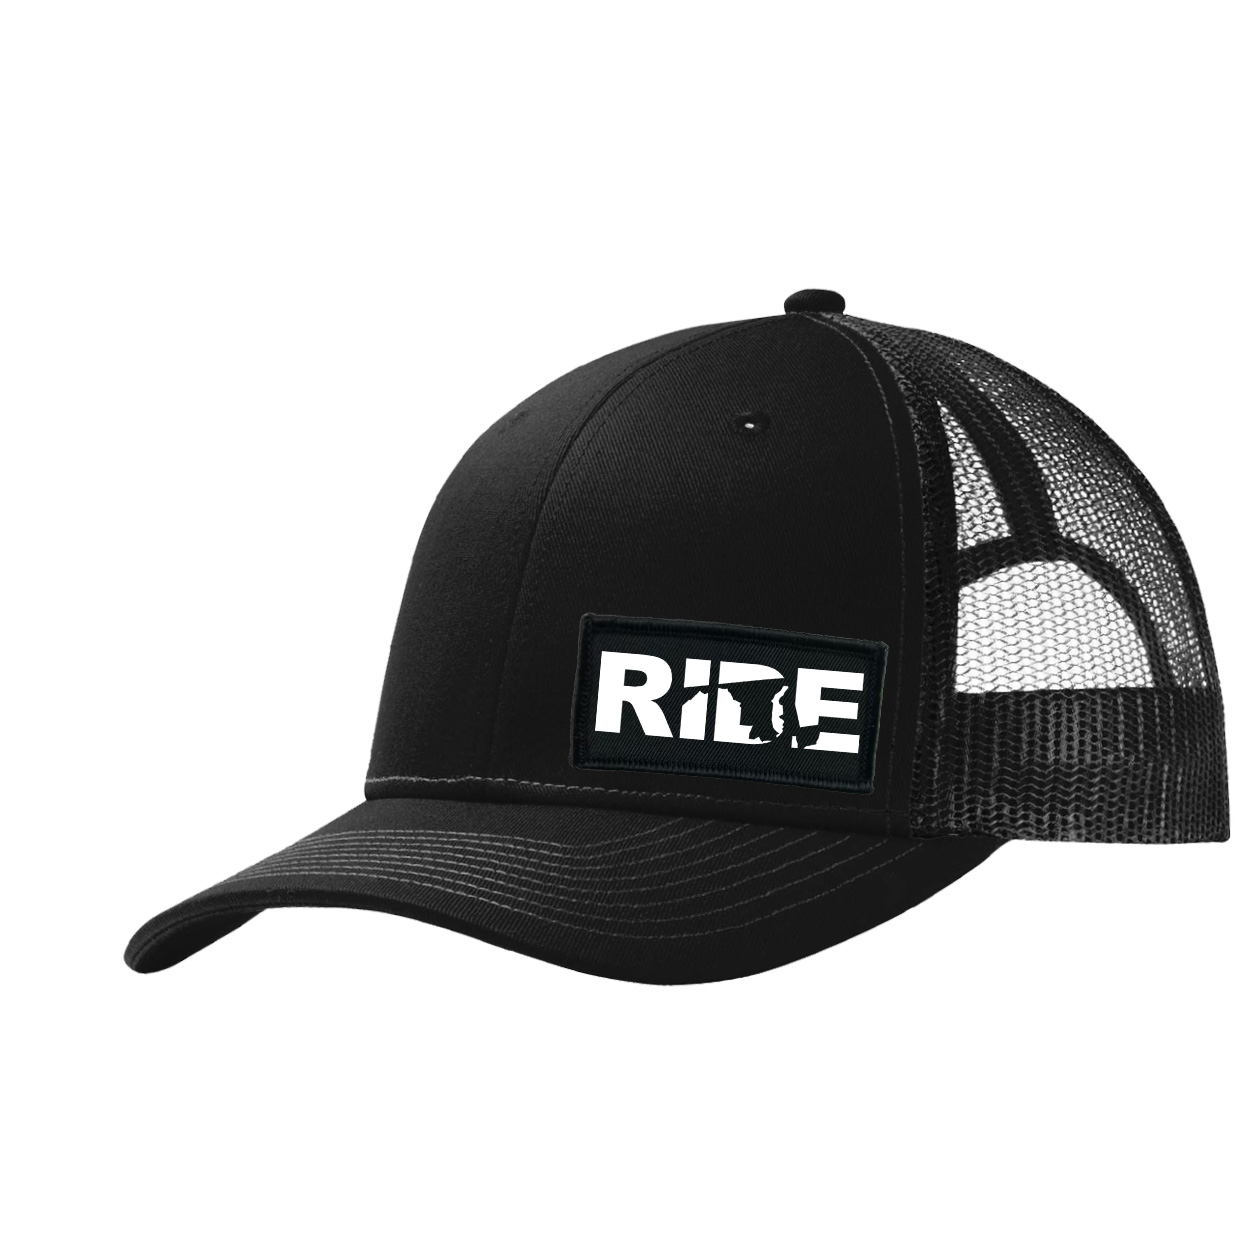 Ride Maryland Night Out Woven Patch Snapback Trucker Hat Black (White Logo)